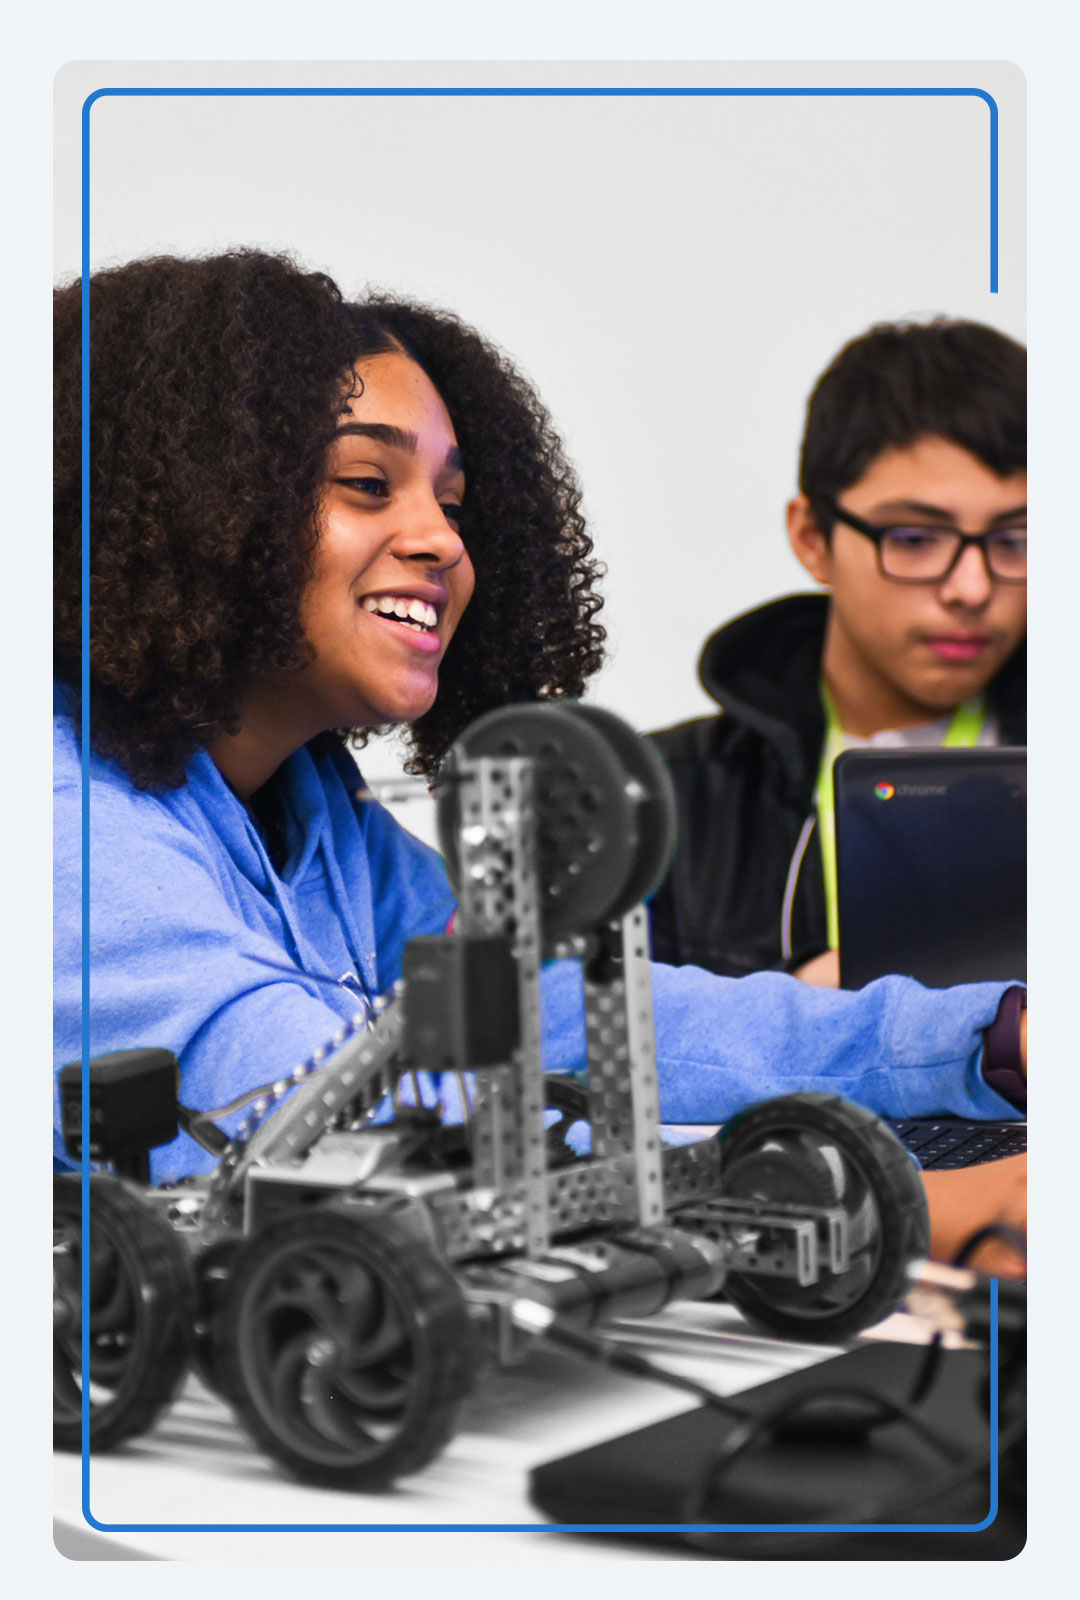 CAST Network student in robotics class is seen smiling while chatting with a peer.